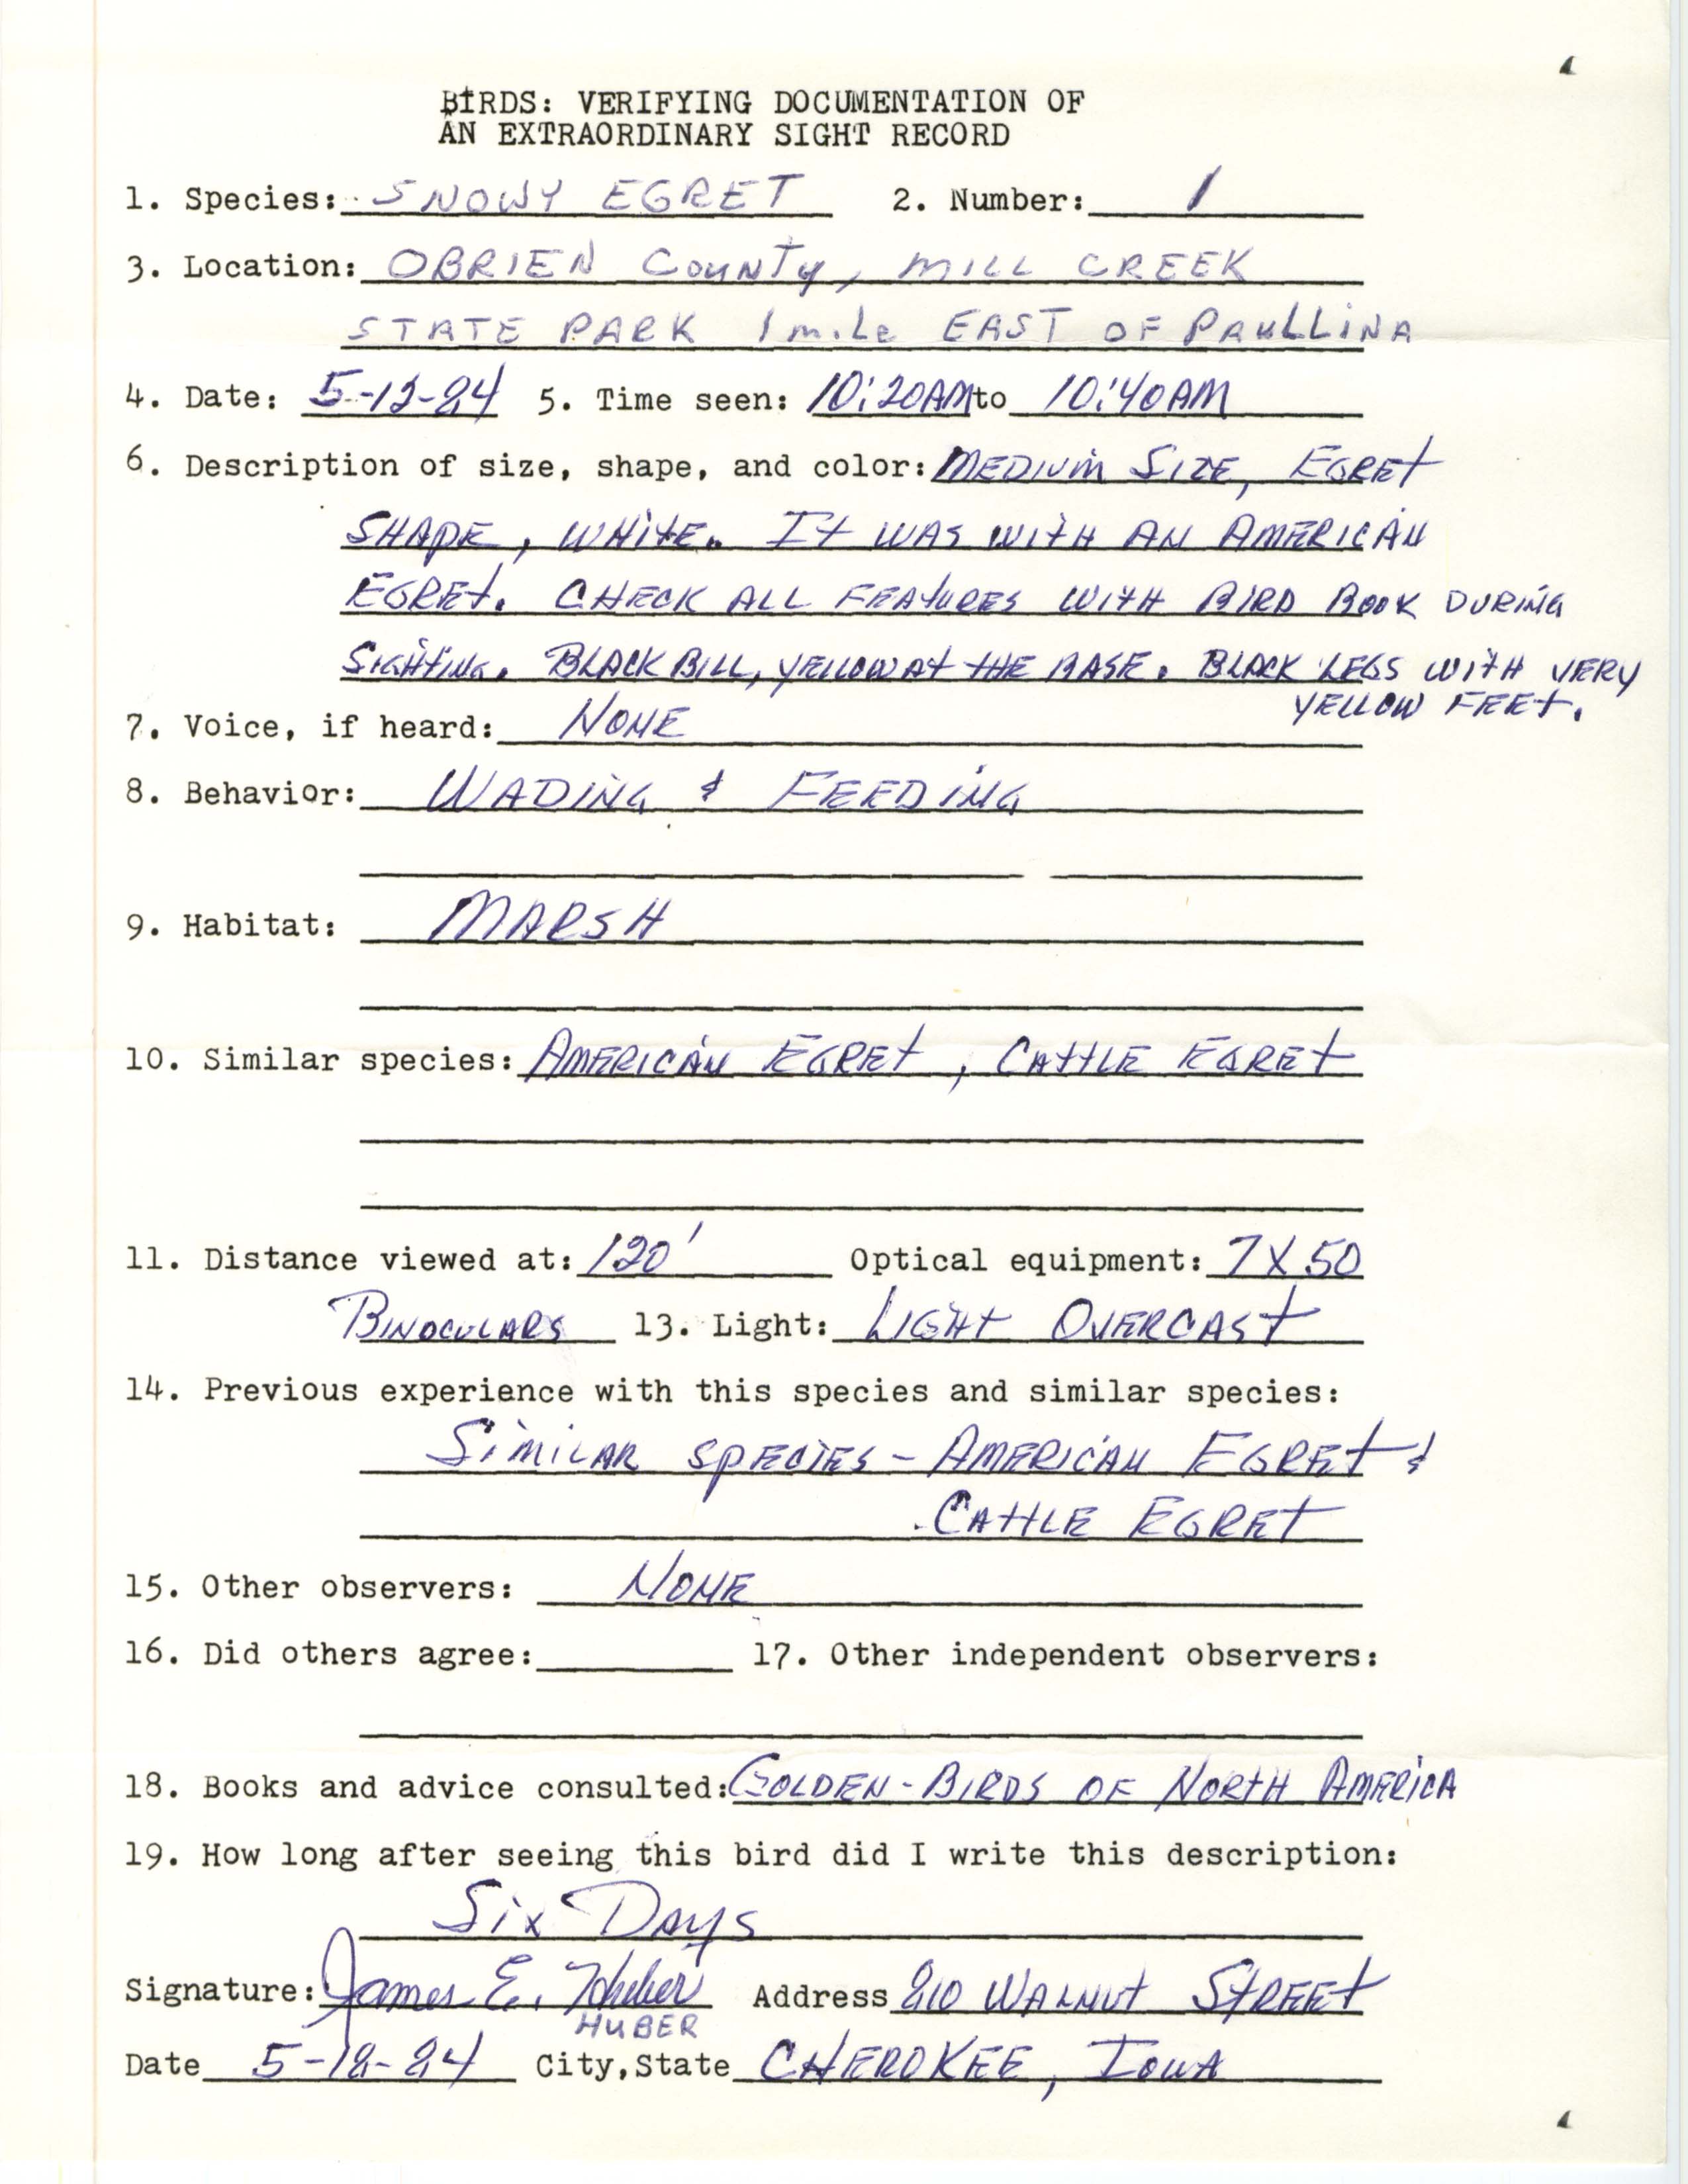 Rare bird documentation form for a Snowy Egret at Mill Creek State Park, 1984